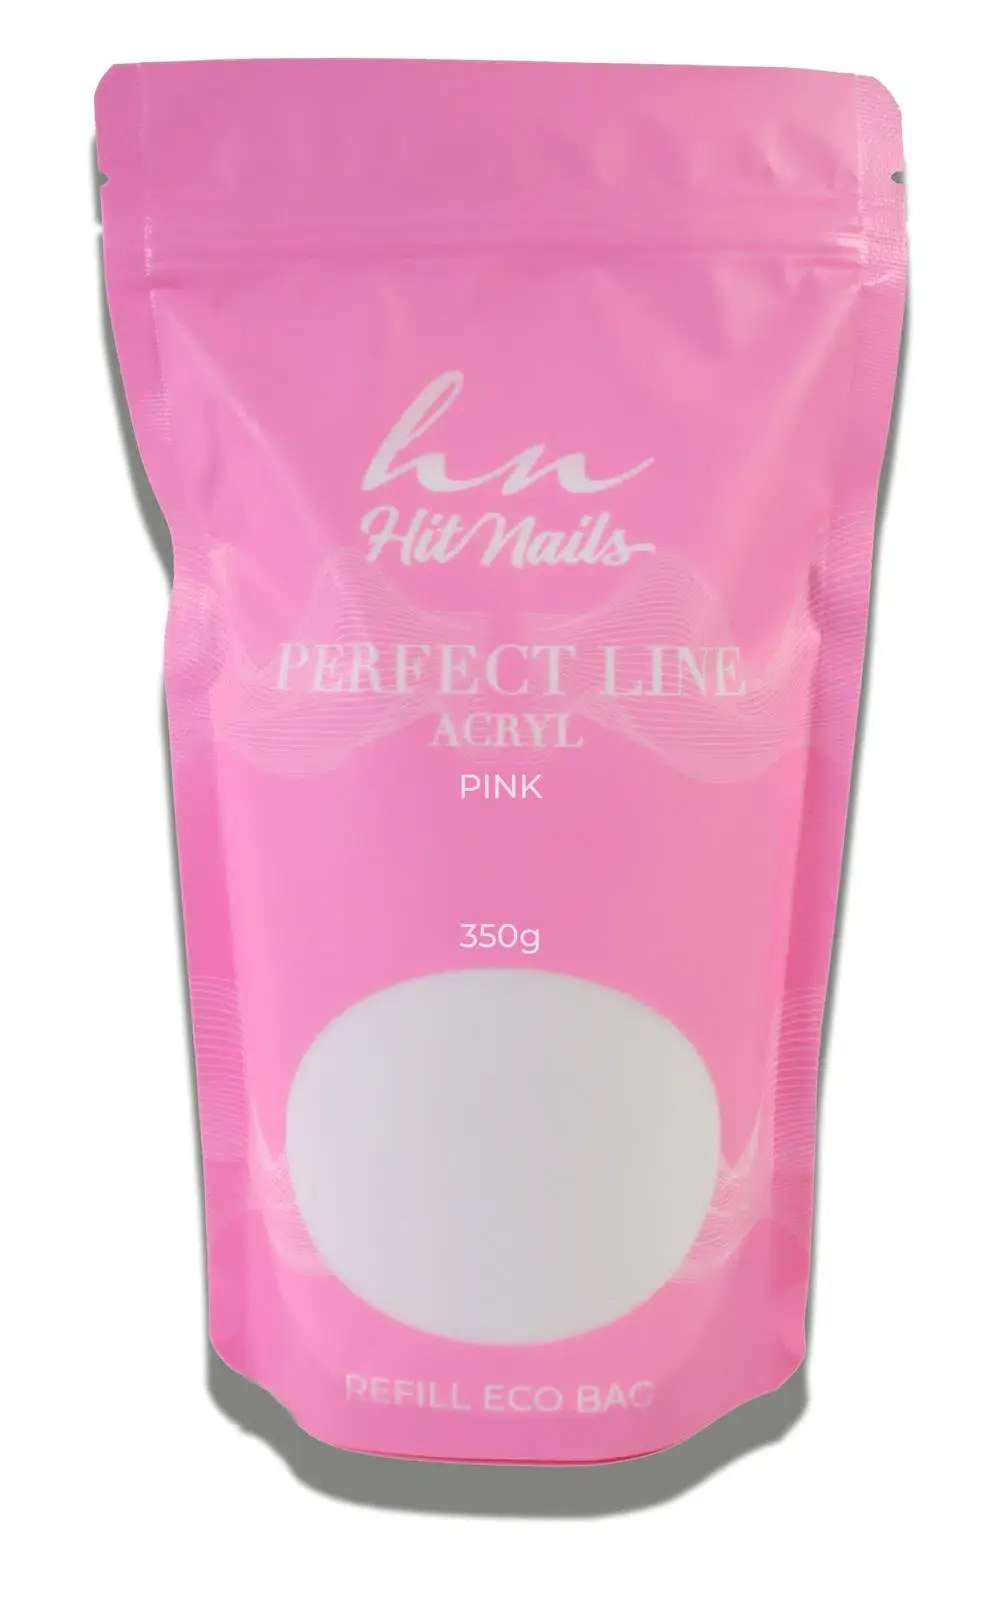 Perfect Line - Acryl - Pink 350g Refill